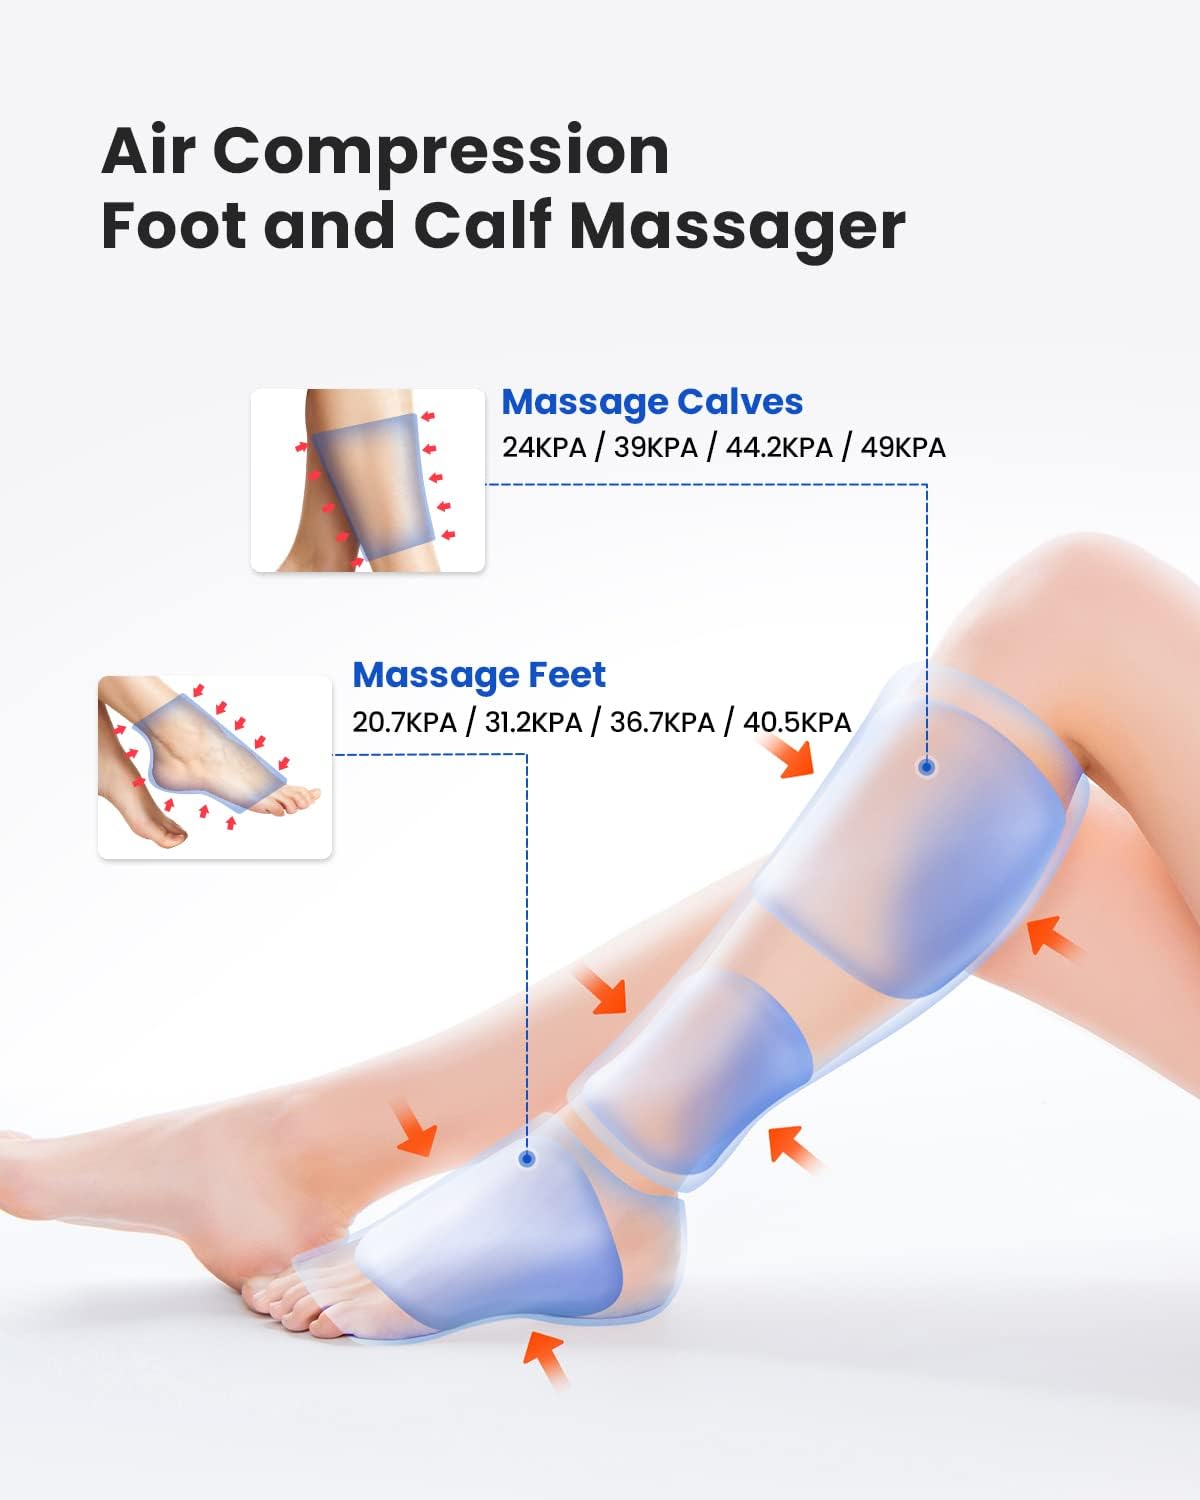 An advertisement for a Renpho EU Aeria Elementary Calf and Foot Massager showing a person's legs wearing the adjustable leg wrap device, with overlay text and arrows pointing to specific features like various pressure settings.